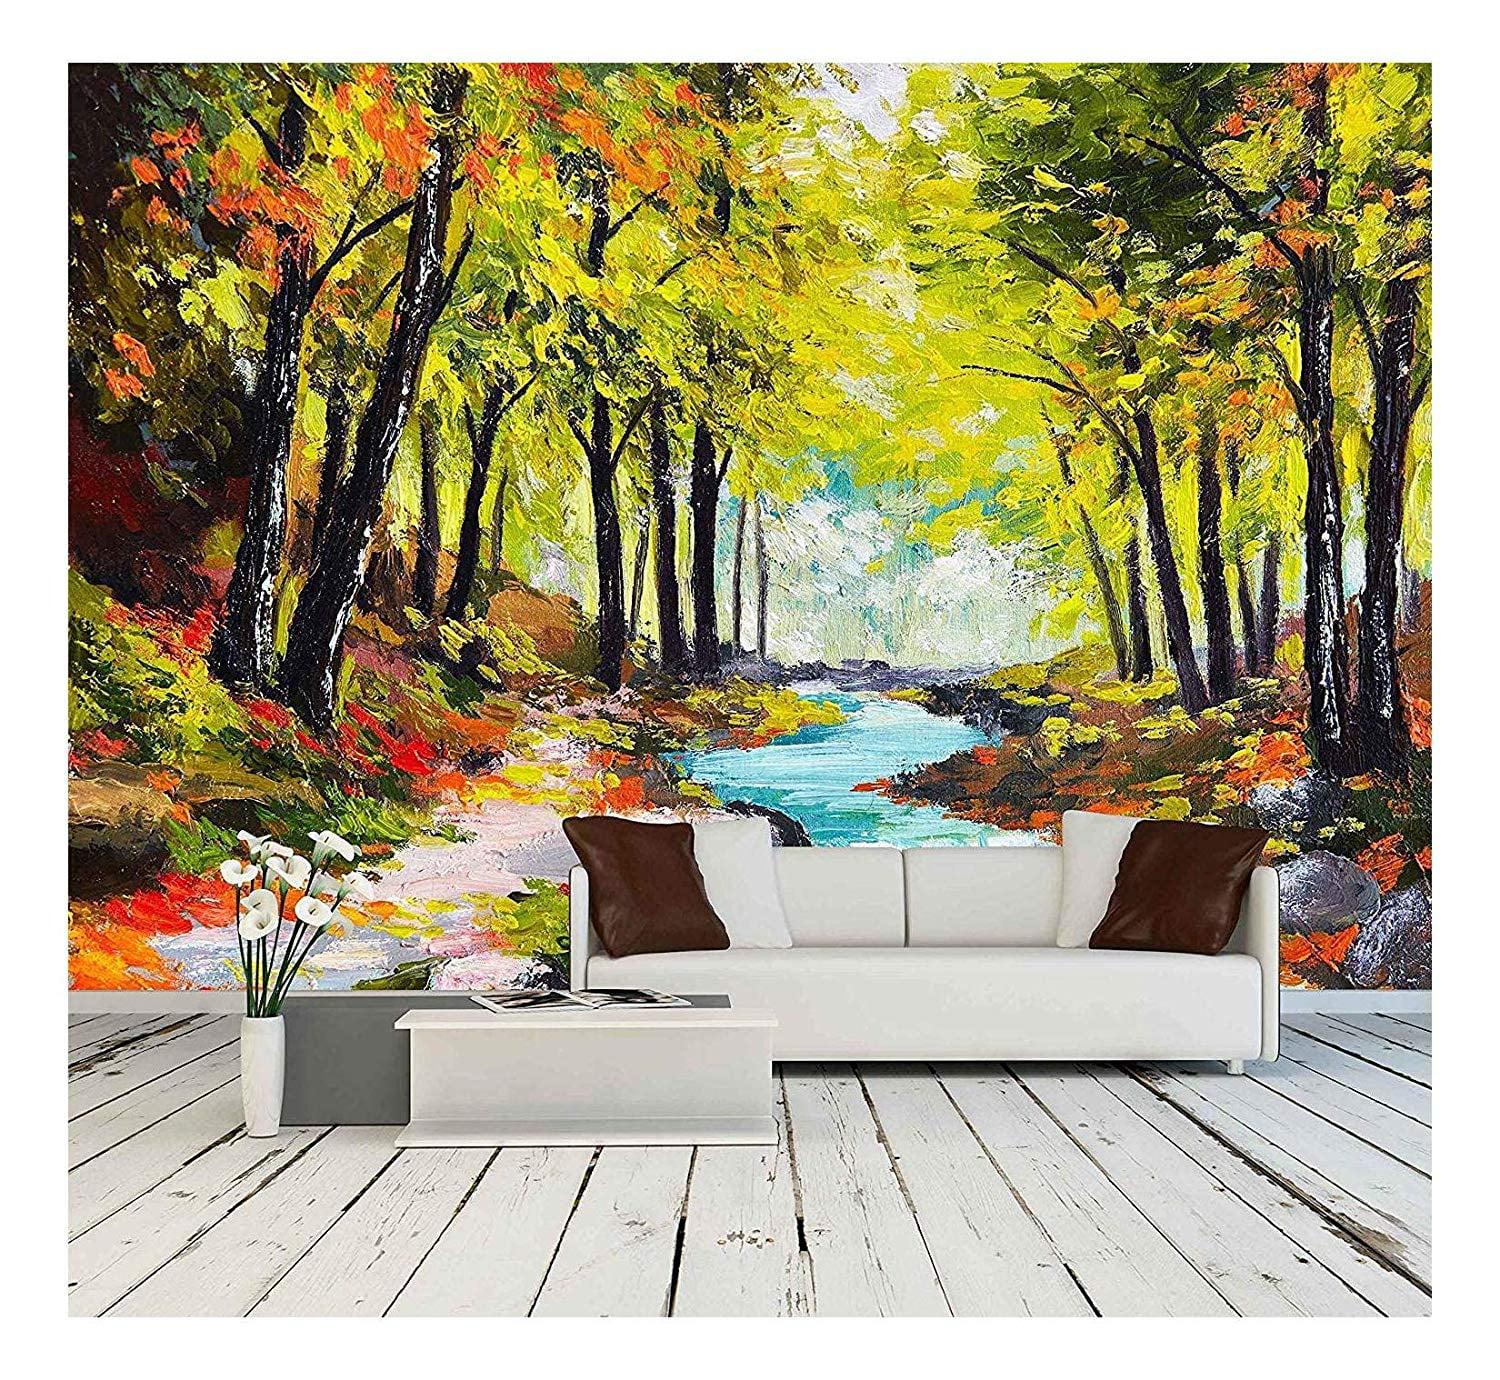 Wall26 Landscape Oil Painting River In Autumn Forest Removable